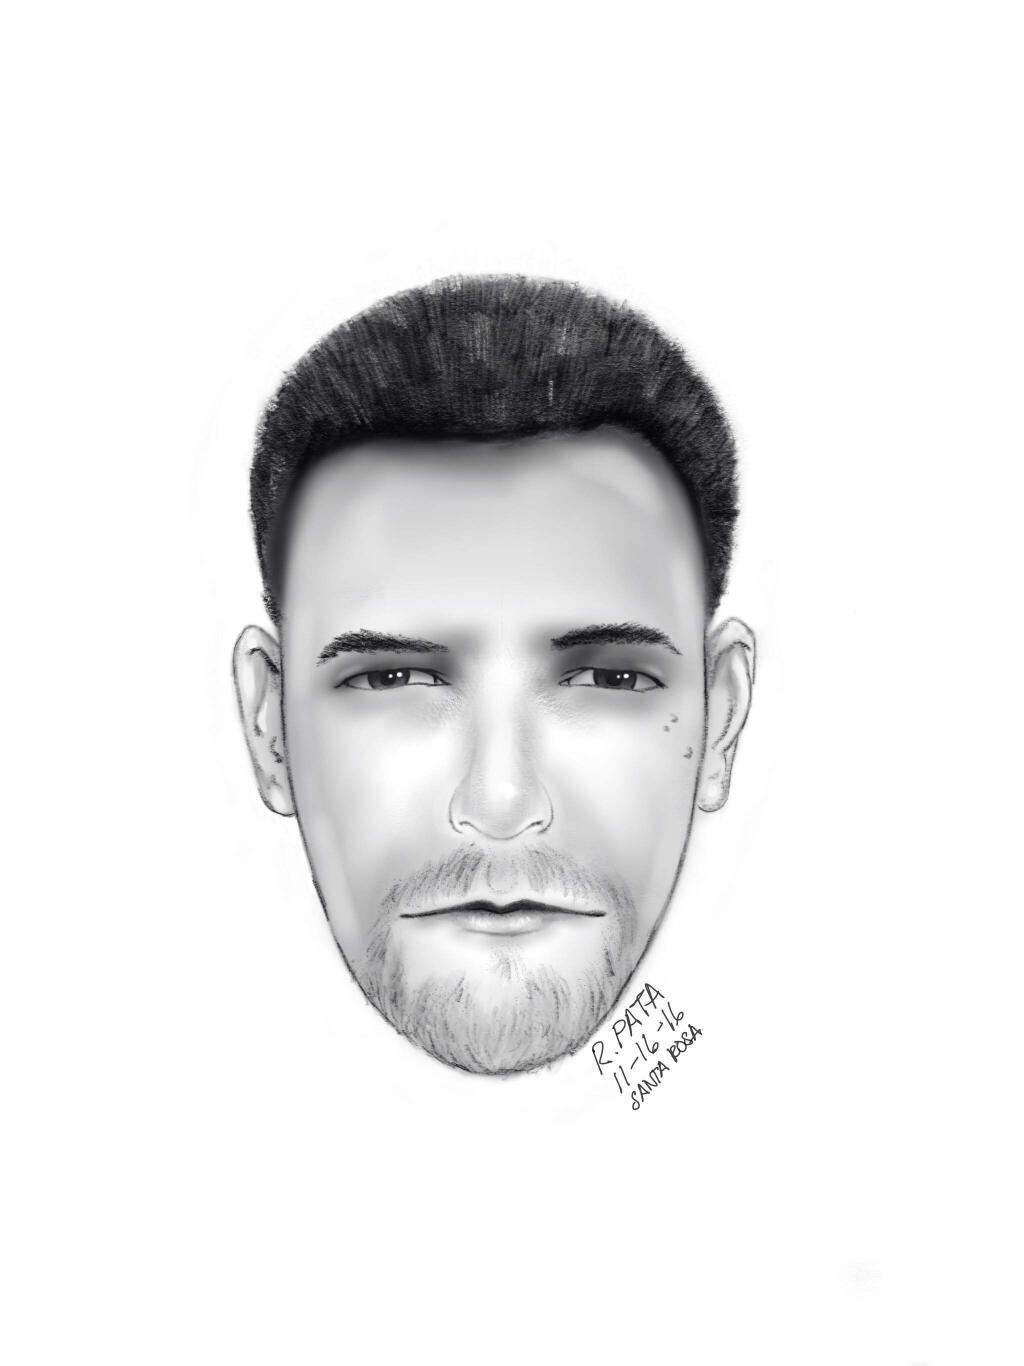 A sketch of the man suspected of assaulting a woman in Santa Rosa in October. (COURTESY OF SANTA ROSA POLICE DEPARTMENT)